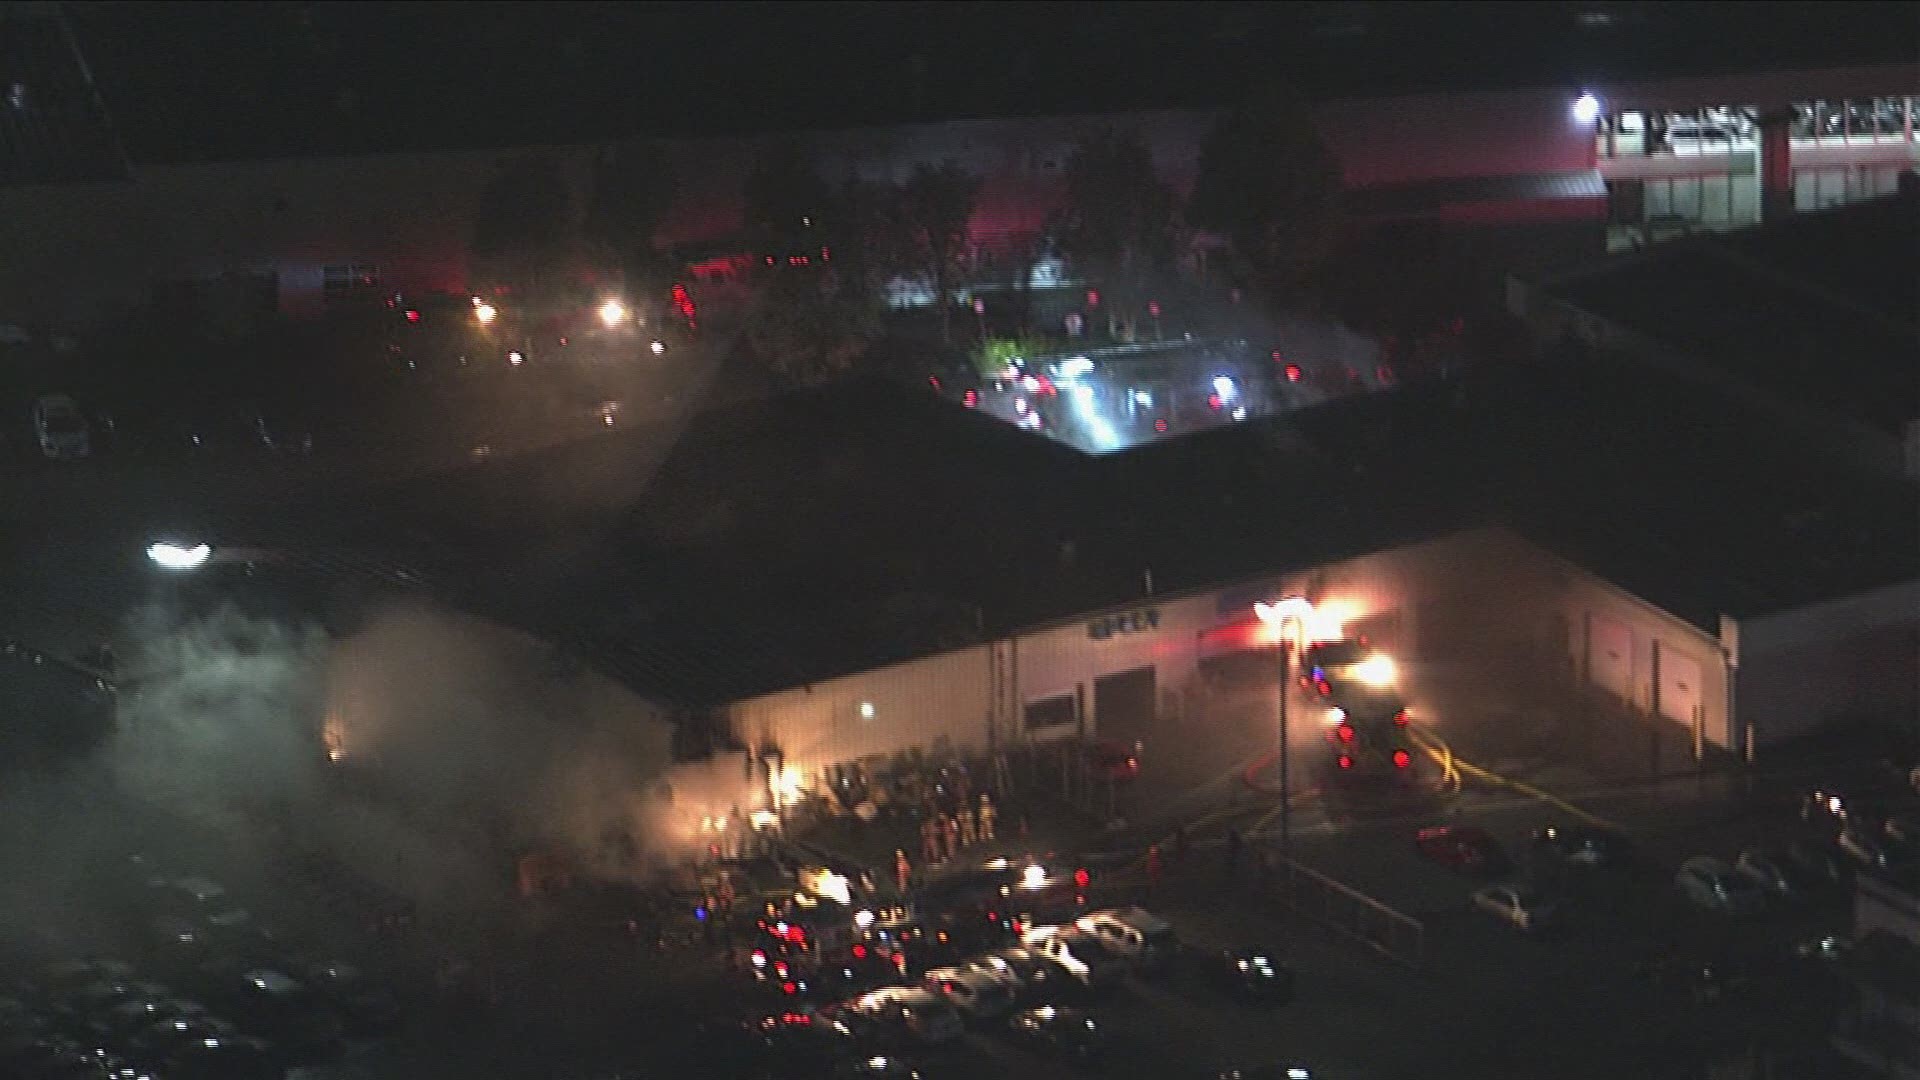 Crews worked Tuesday night to put out a large fire at a Maryland car dealership.